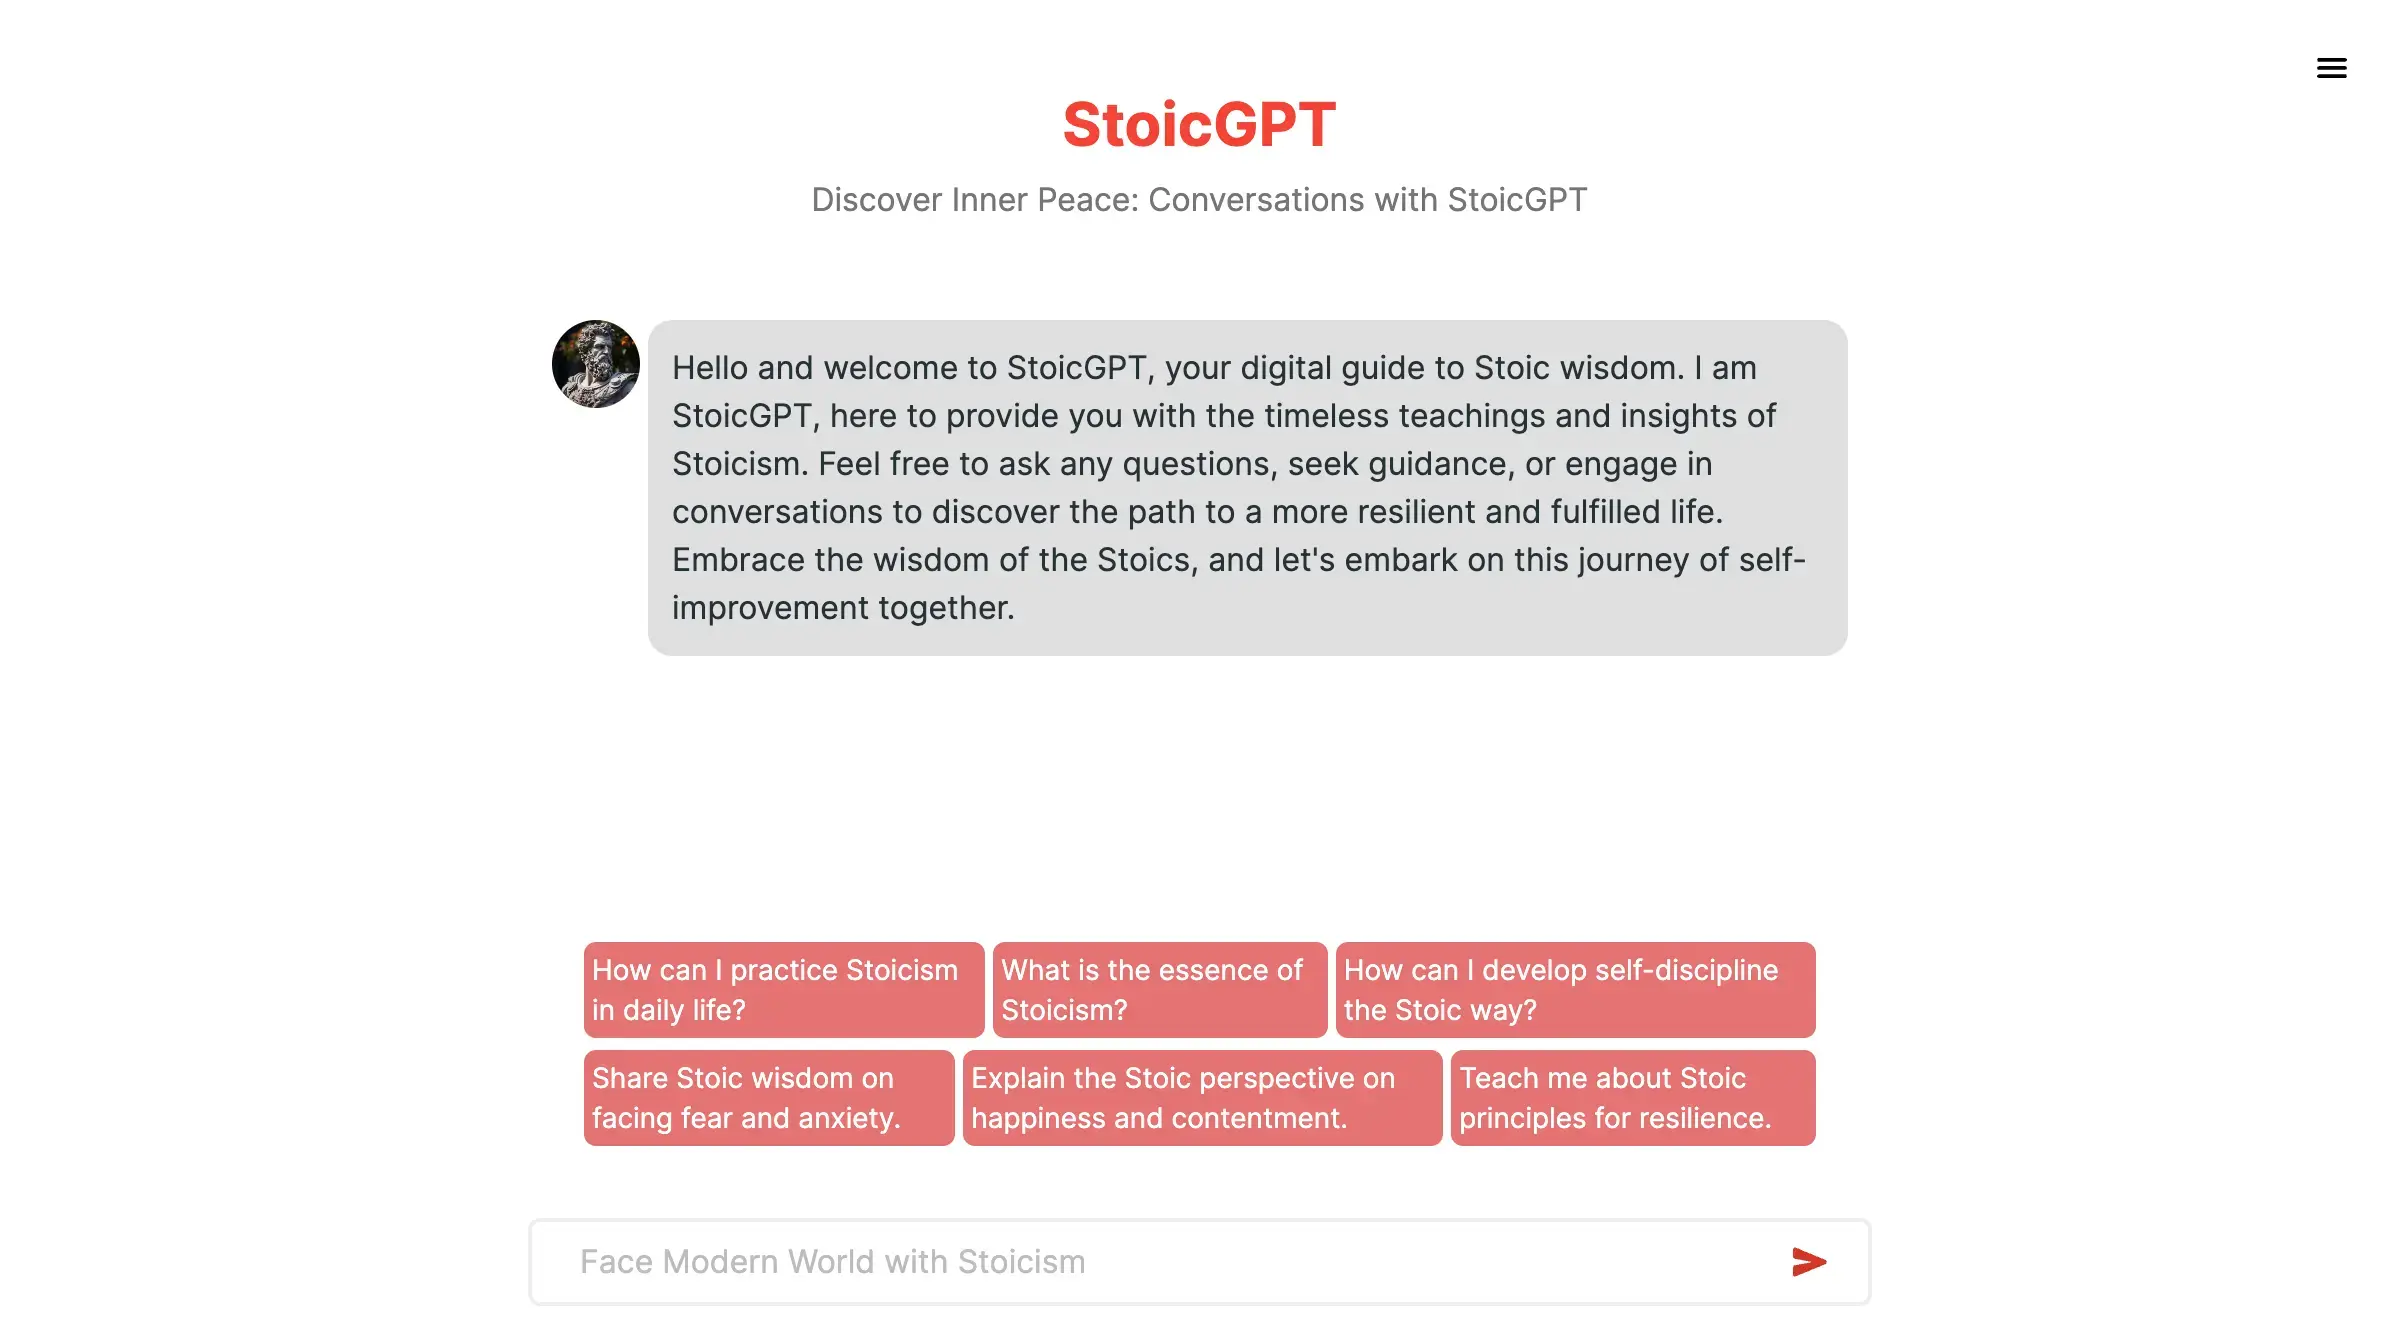 StoicGPT